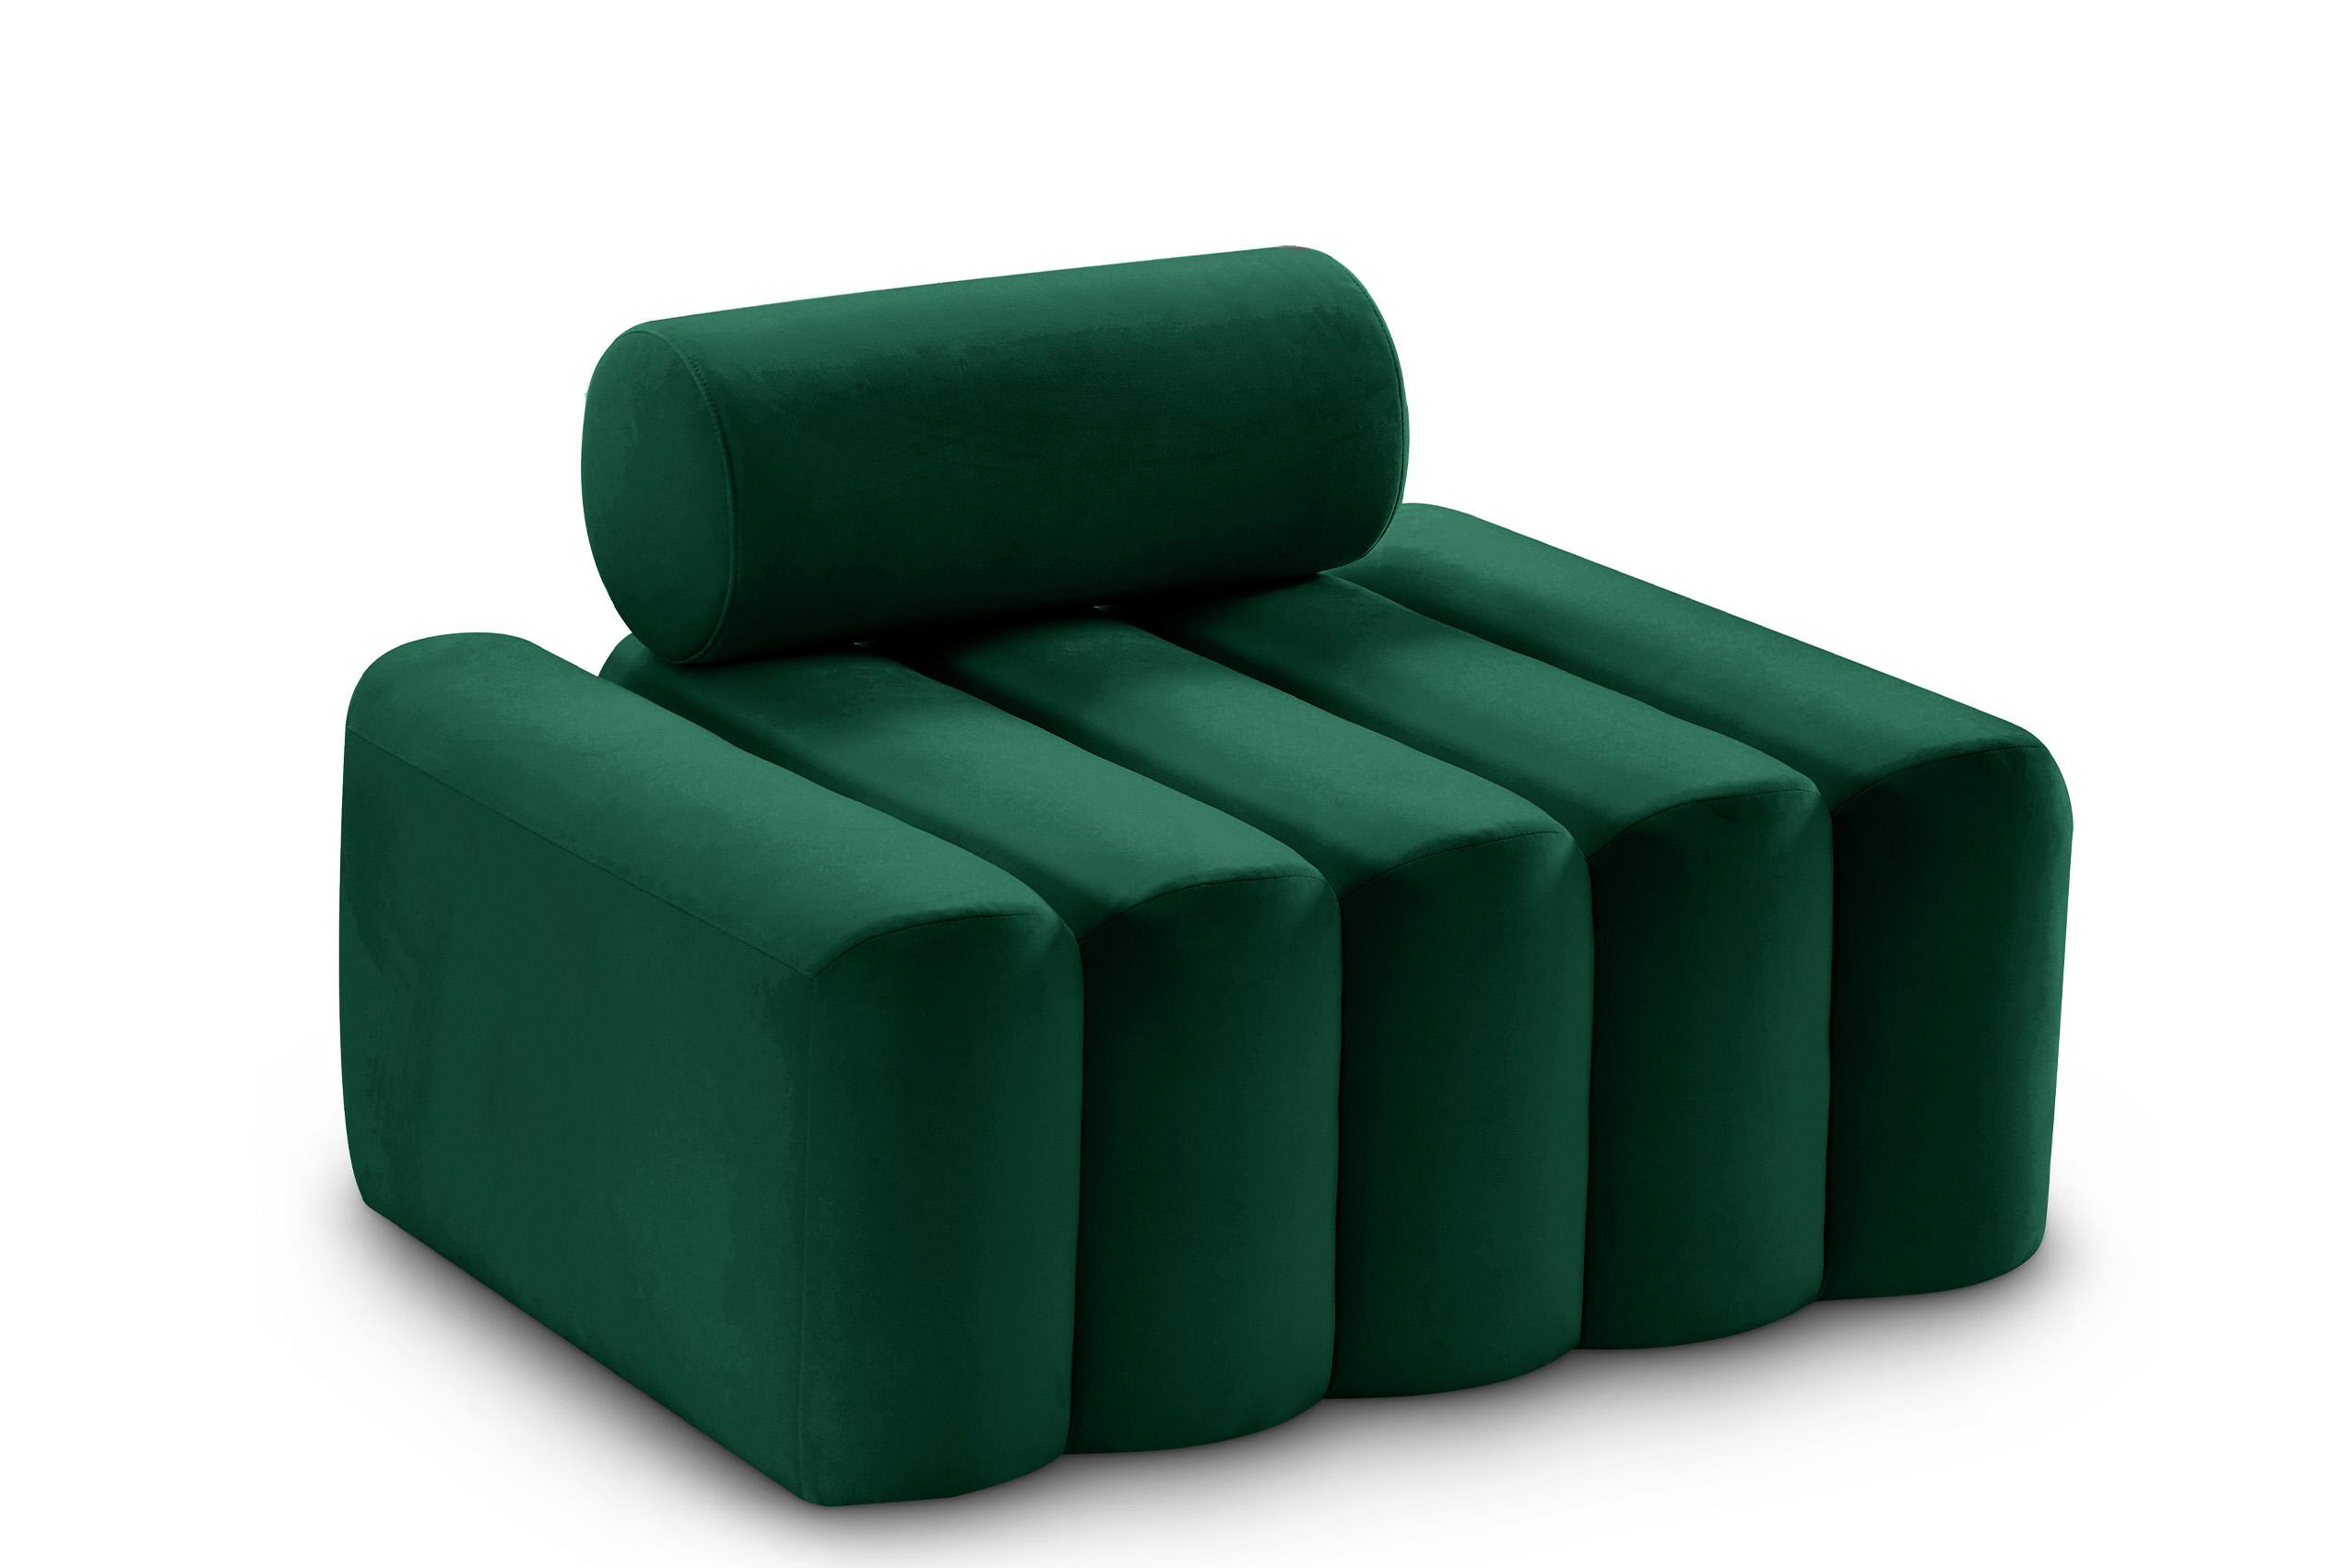 

    
Glam GREEN Velvet Channel Tufted Chair Melody 647Green-C Meridian Contemporary
